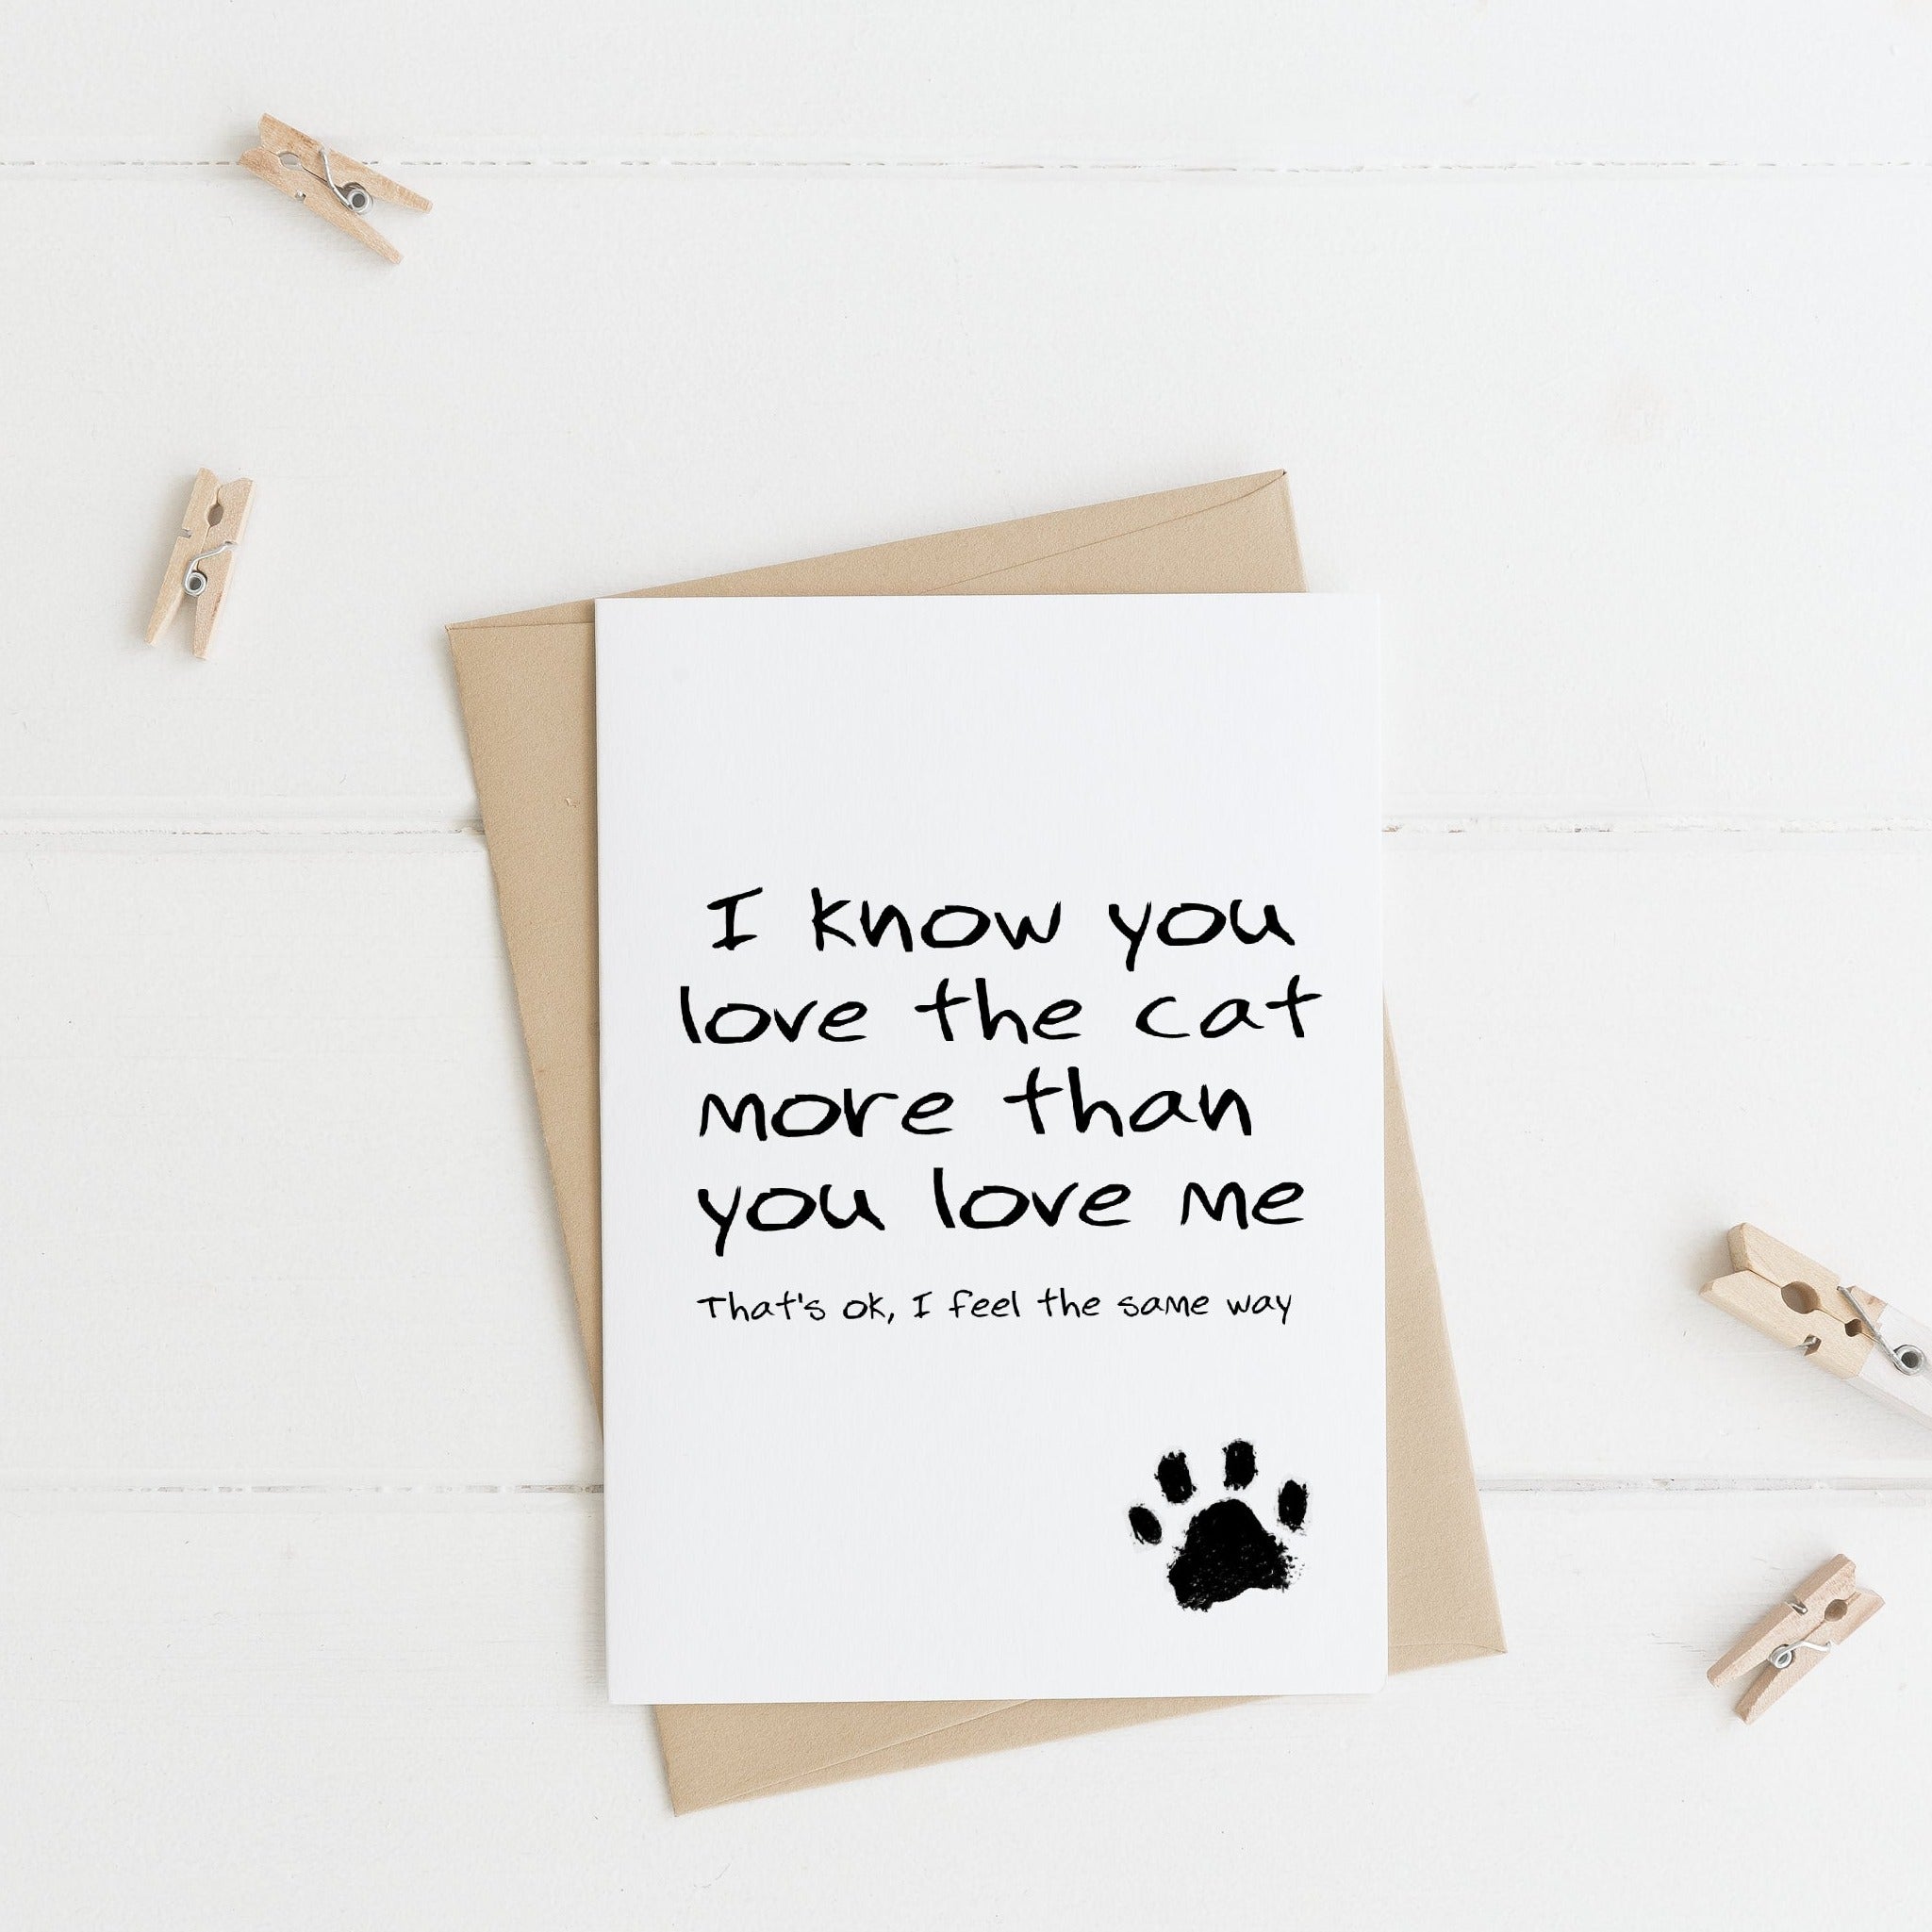 i know you love the cat more than you love me, thats ok, i feel the same way. valentines day animal greeting card